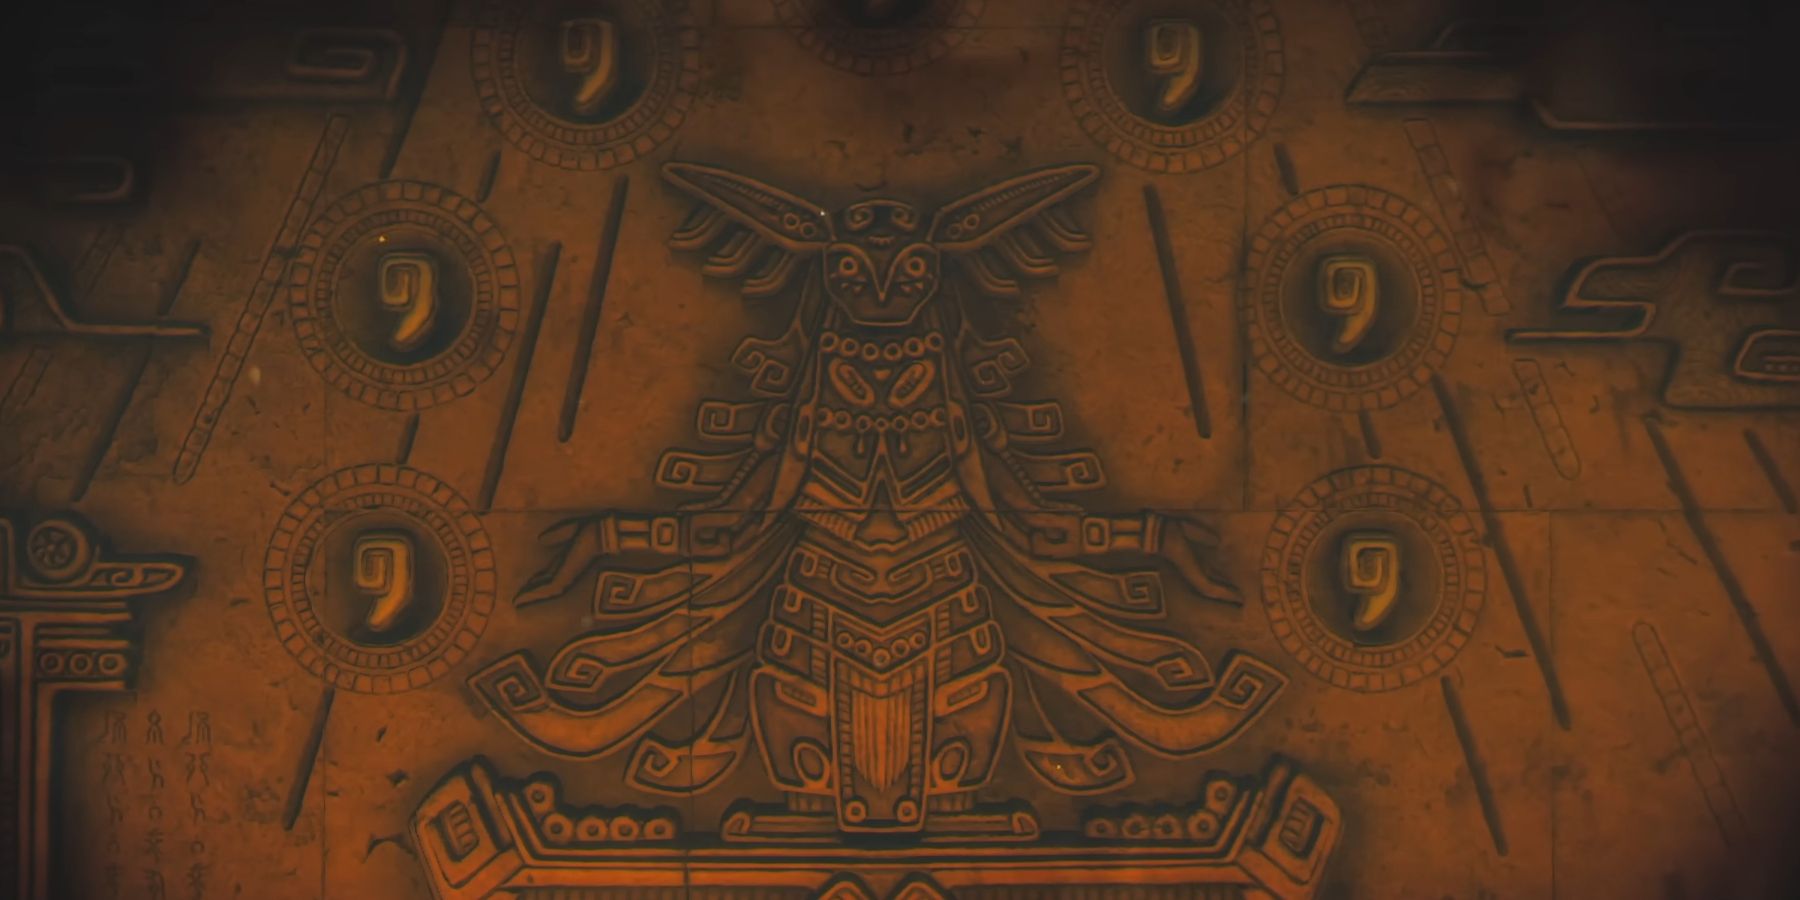 A carving of an ornate deity, encircled by a series of tear-shaped symbols. Image Source: Nintendo